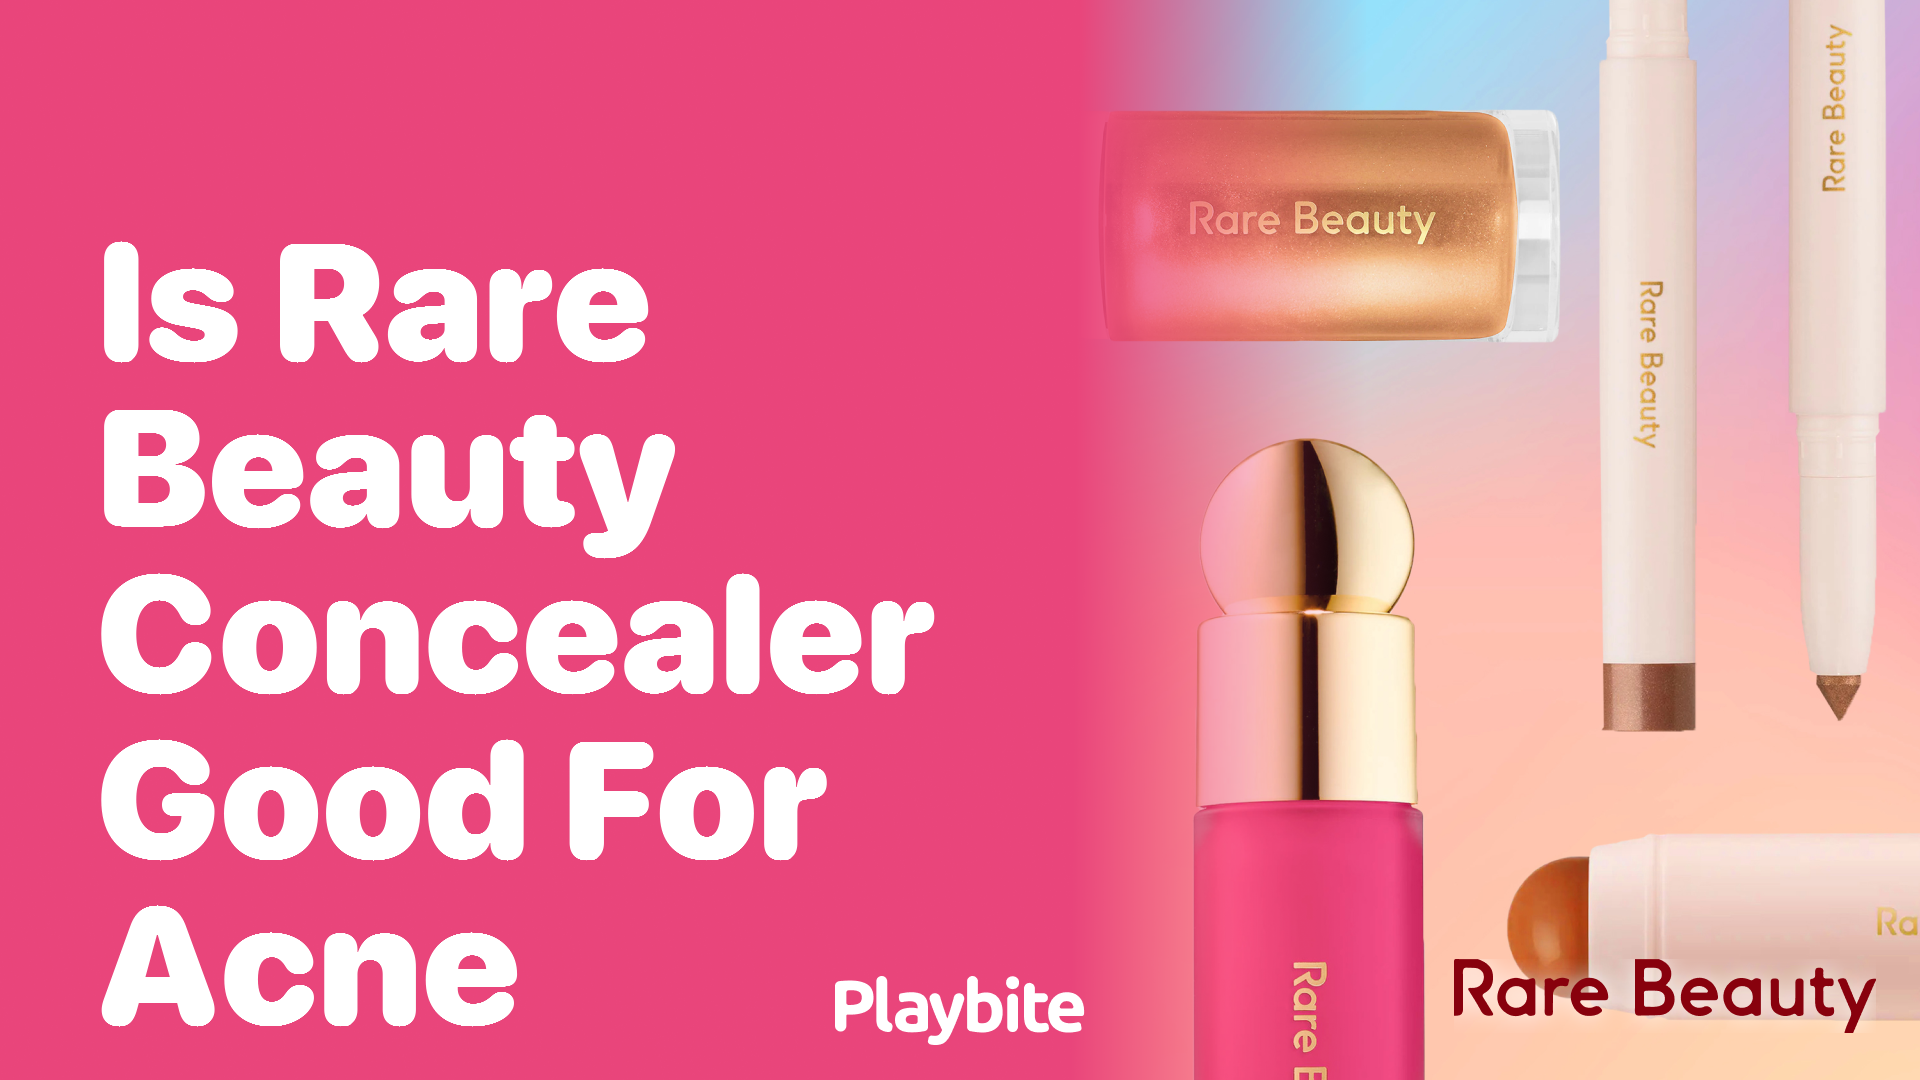 Is Rare Beauty Concealer Good for Acne?